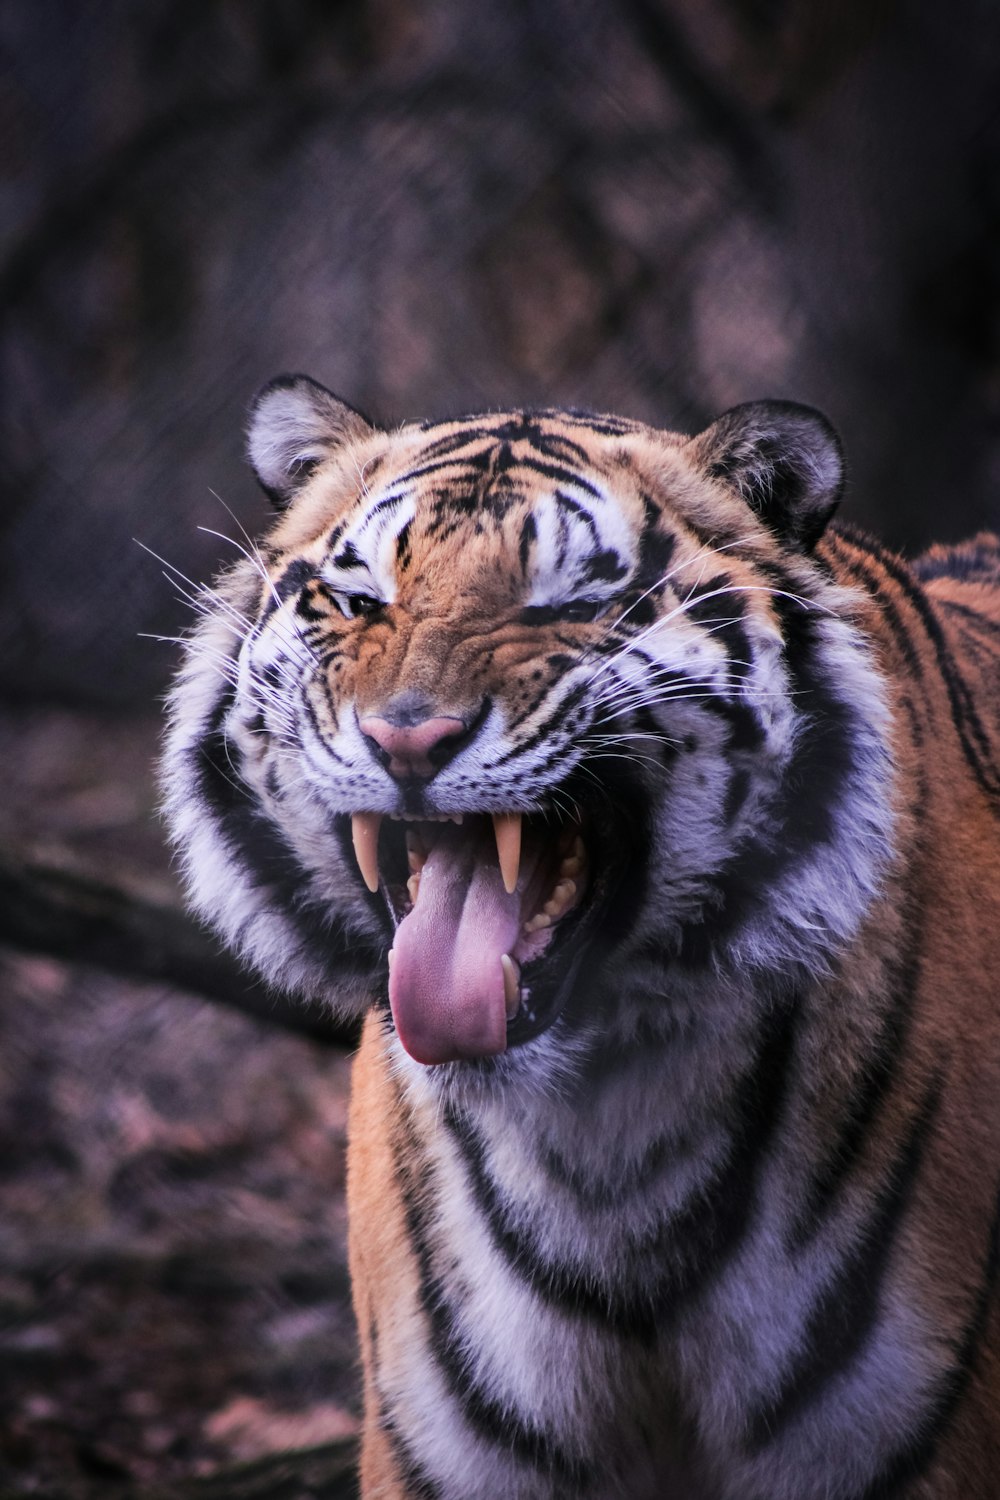 a close up of a tiger with its mouth open